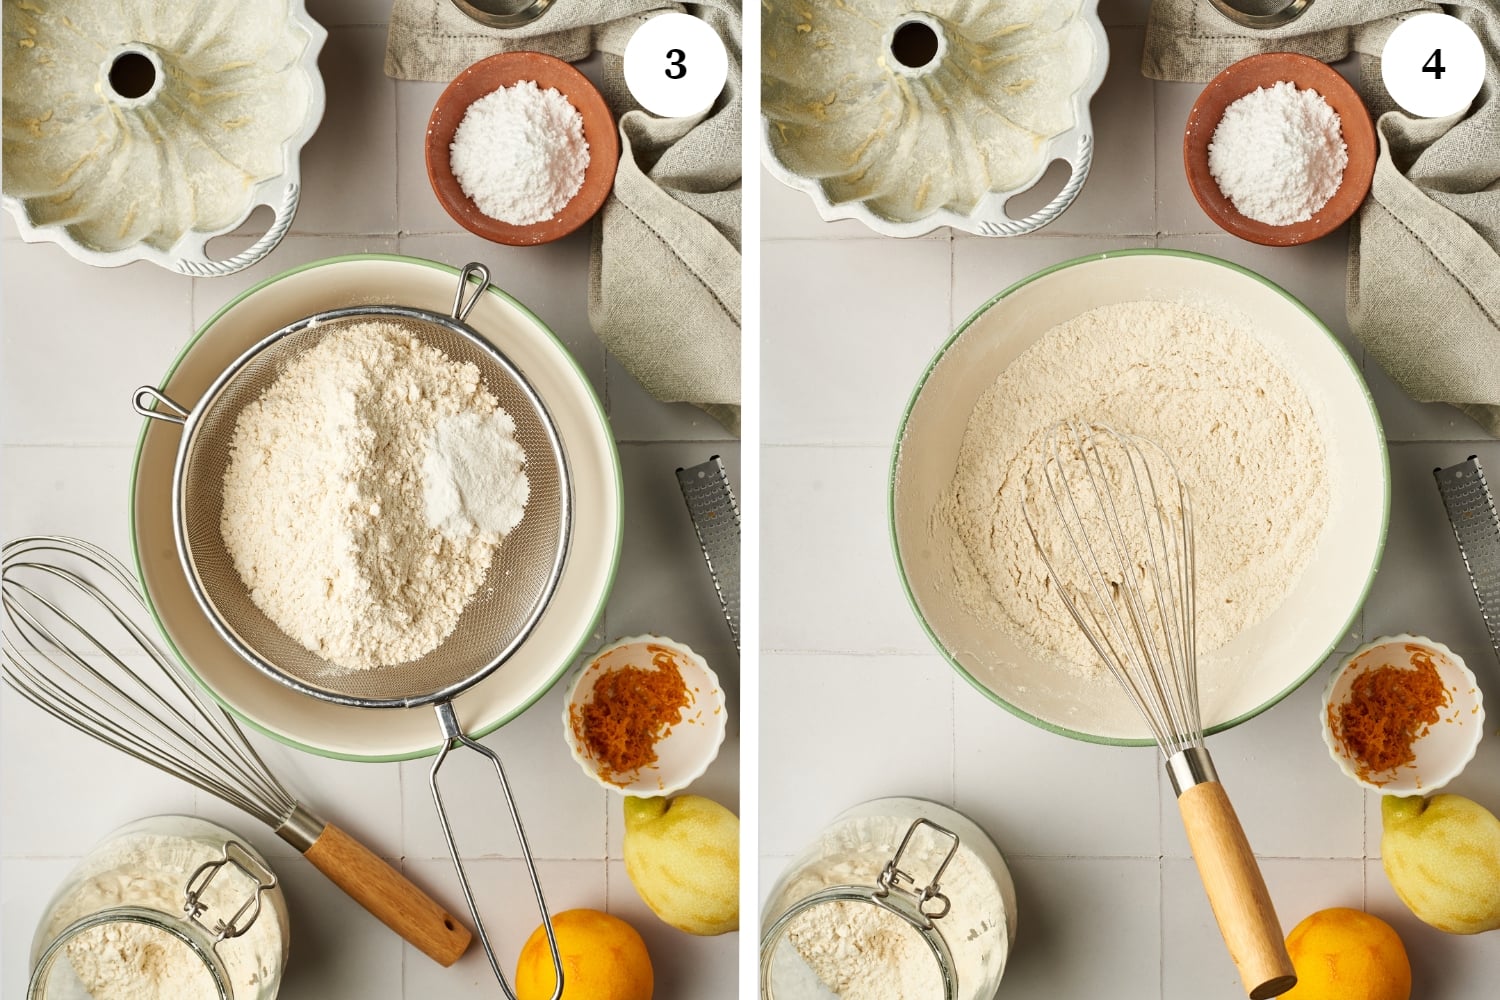 first photo is a sifter with flour inside on top of a bowl. other photo is a bowl of flour with a whisk. both photos have a bundt pan, bowl of powdered sugar, jar of flour, orange zest, an orange and a lemon, and a zester around the bowl of flour.